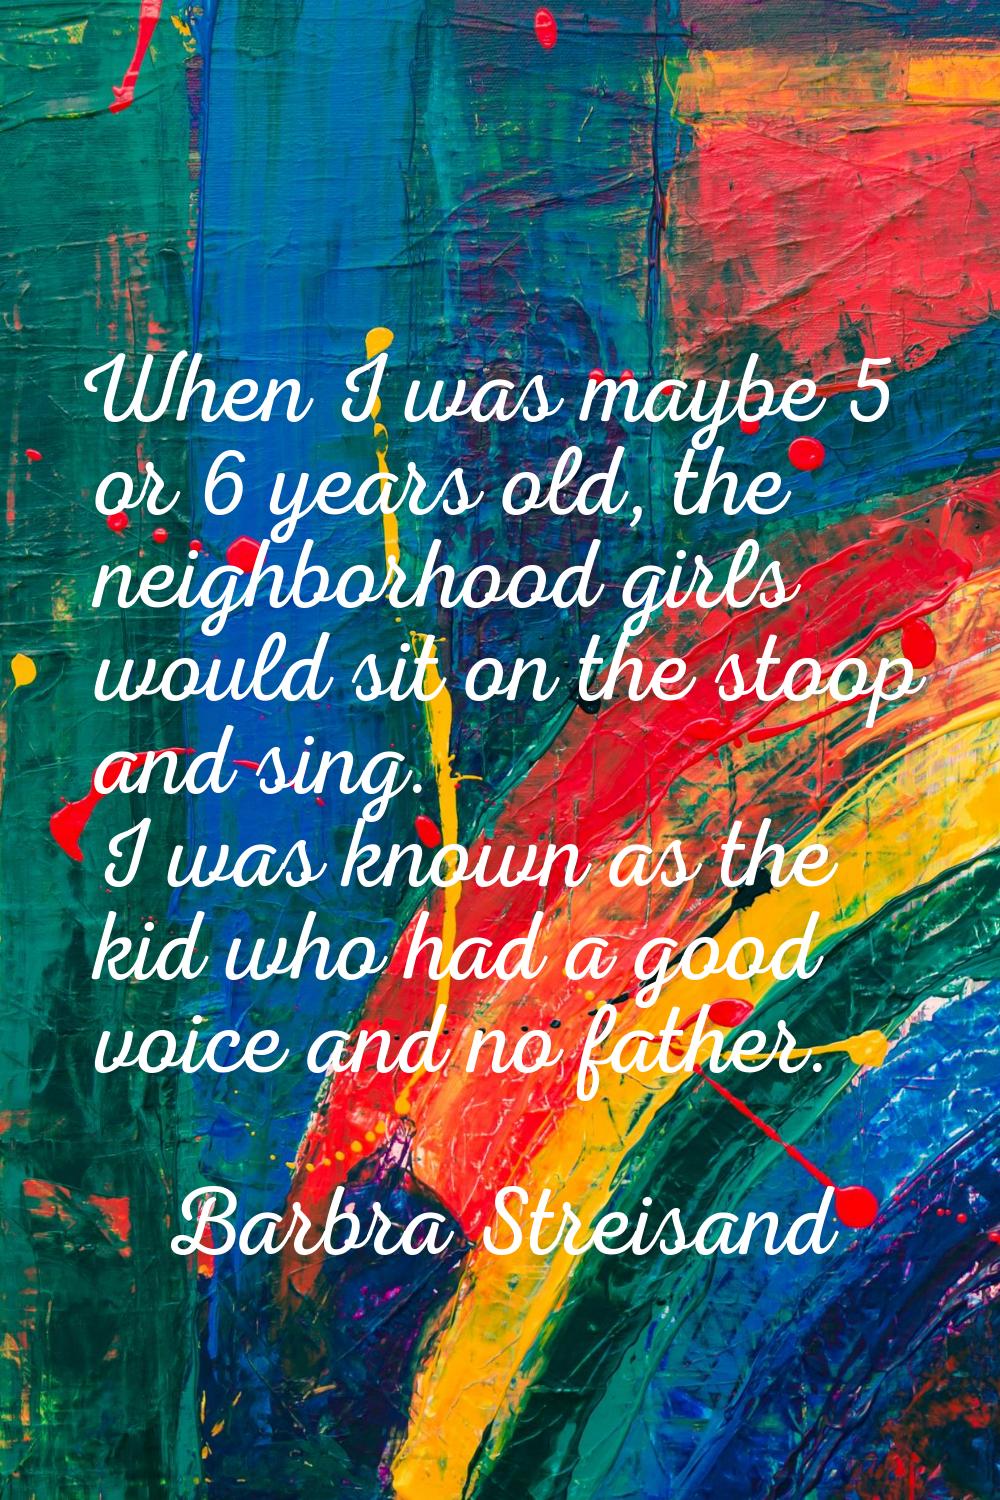 When I was maybe 5 or 6 years old, the neighborhood girls would sit on the stoop and sing. I was kn